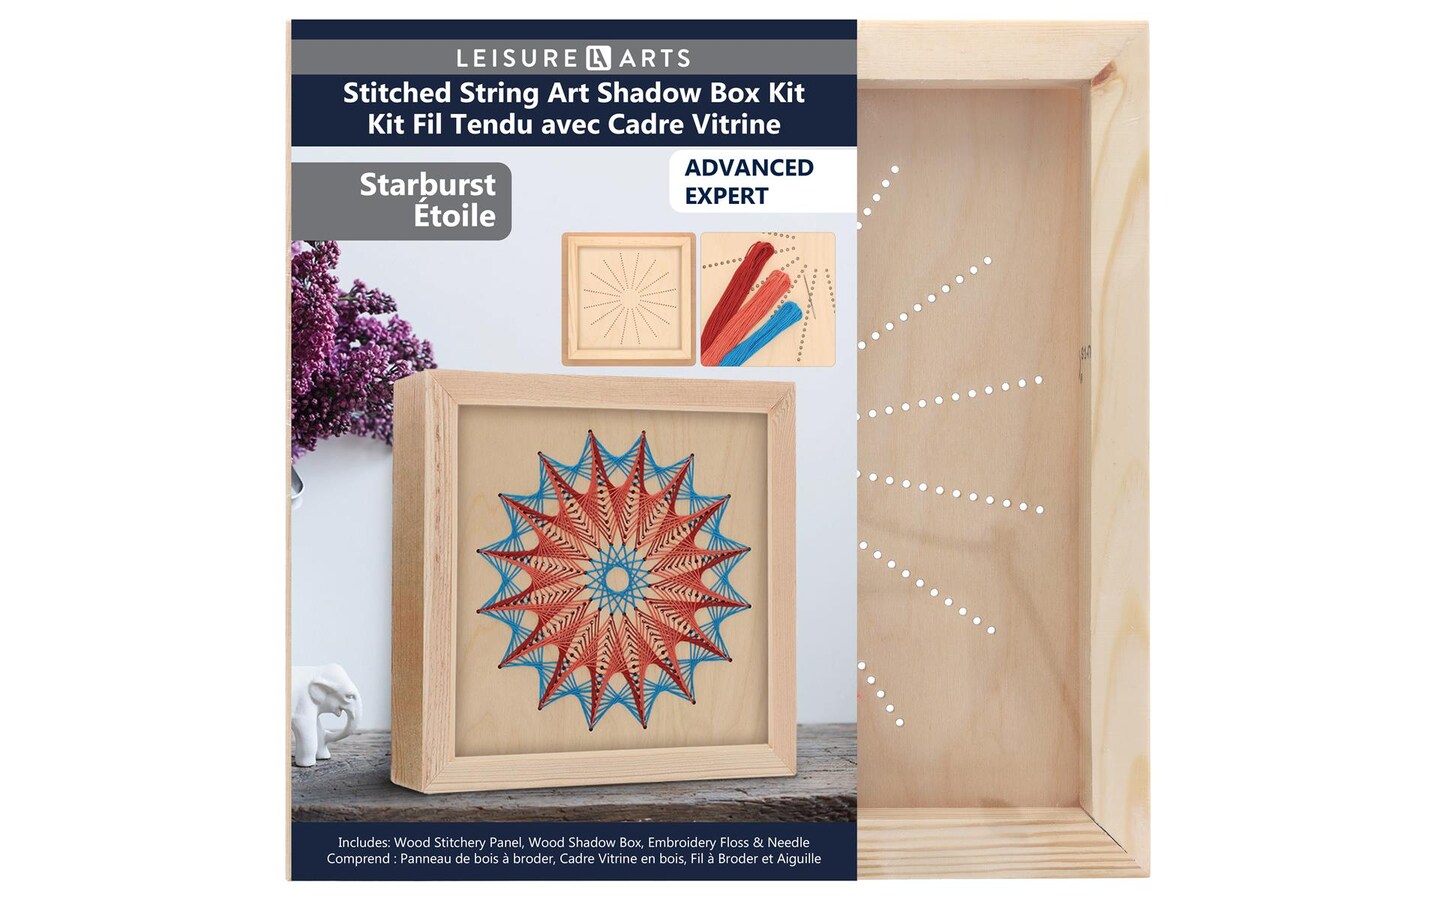 Wood Stitched String Art Kit with Shadow Box Starburst - adult or kids  craft - craft kits for teens - string art kit for adults - 3d string art -  3d string